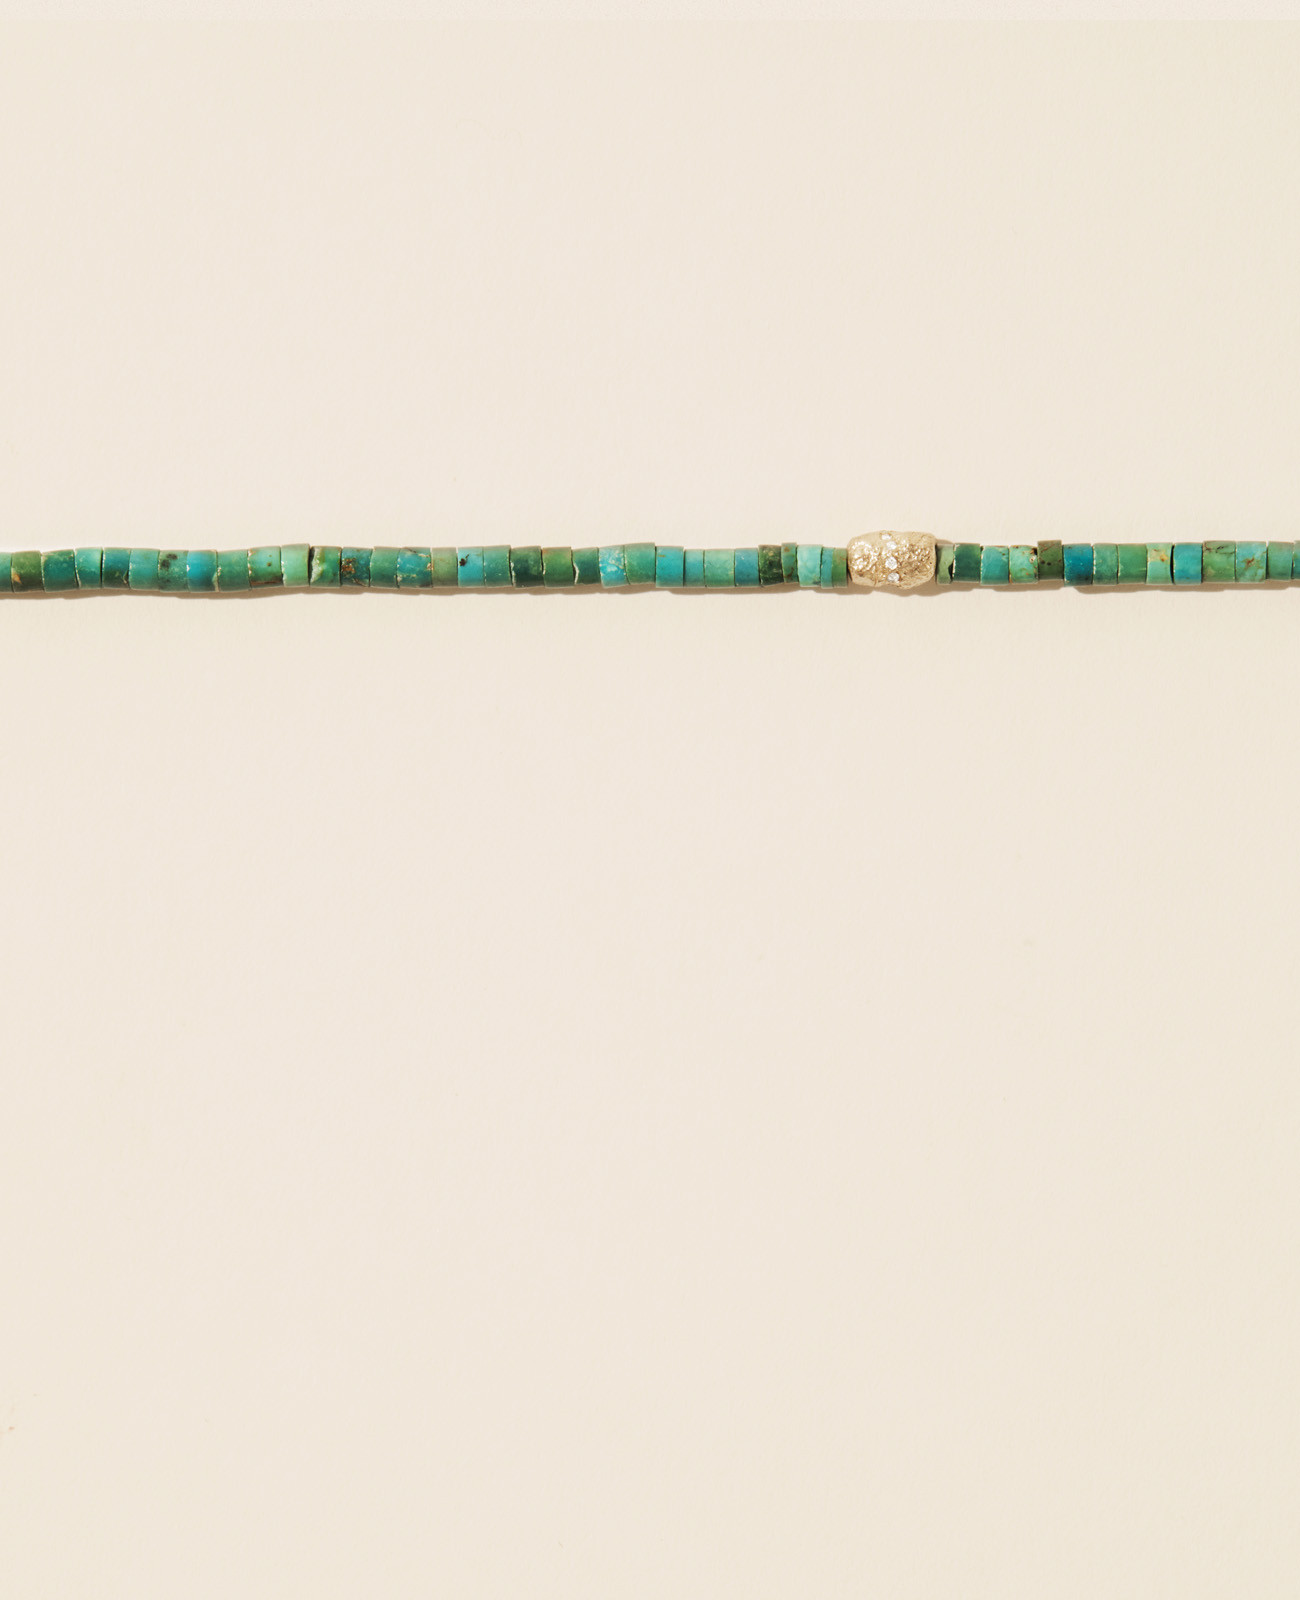 TAYLOR N°1 TURQUOISE necklace pascale monvoisin jewelry paris